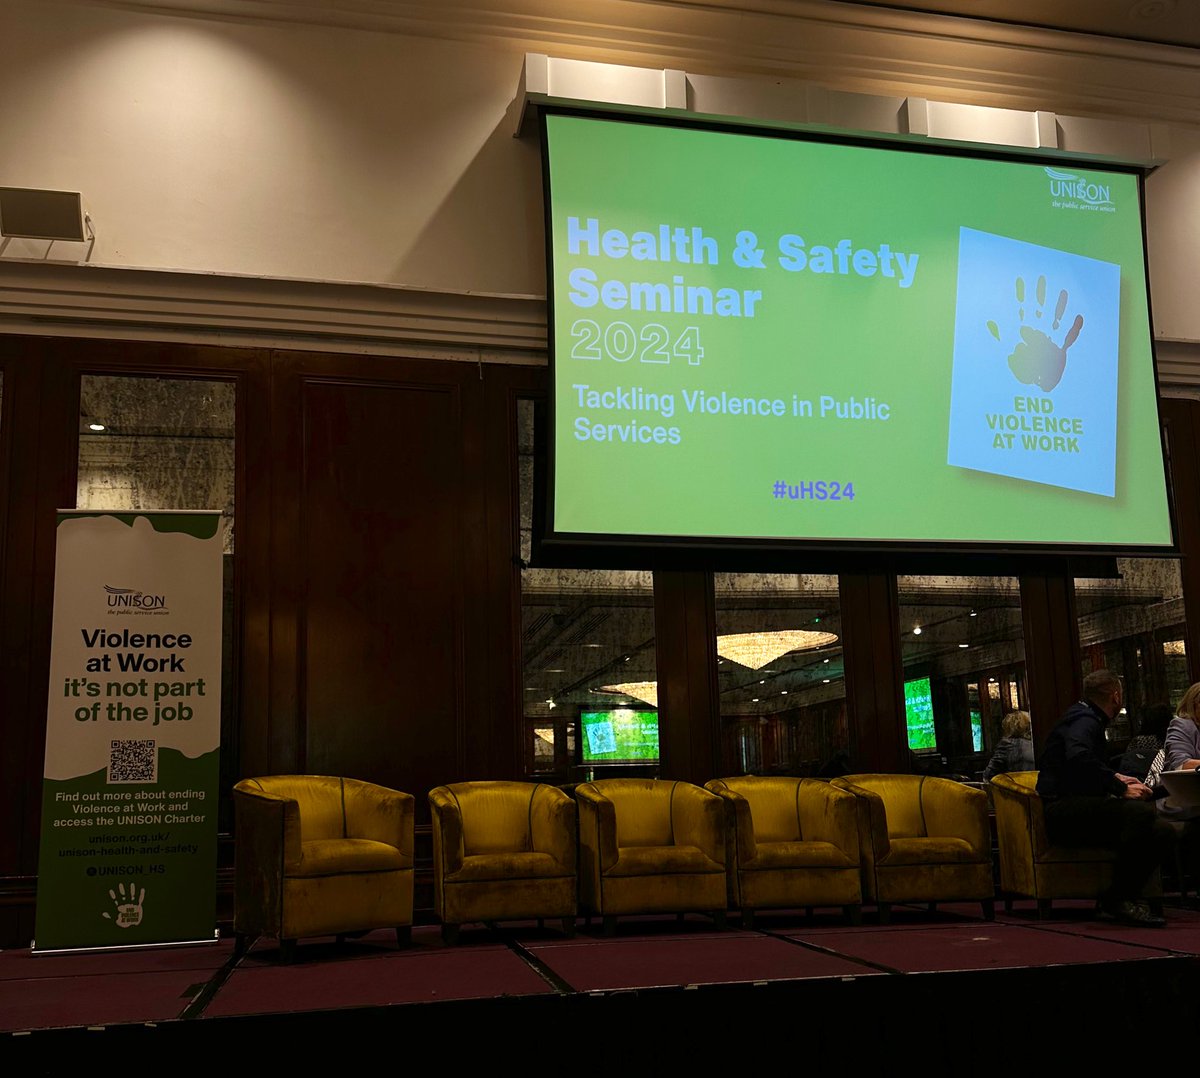 In Belfast this morning for @unisontheunion’s Health and Safety seminar. We are kicking off with a discussion about violence at work #UHS24